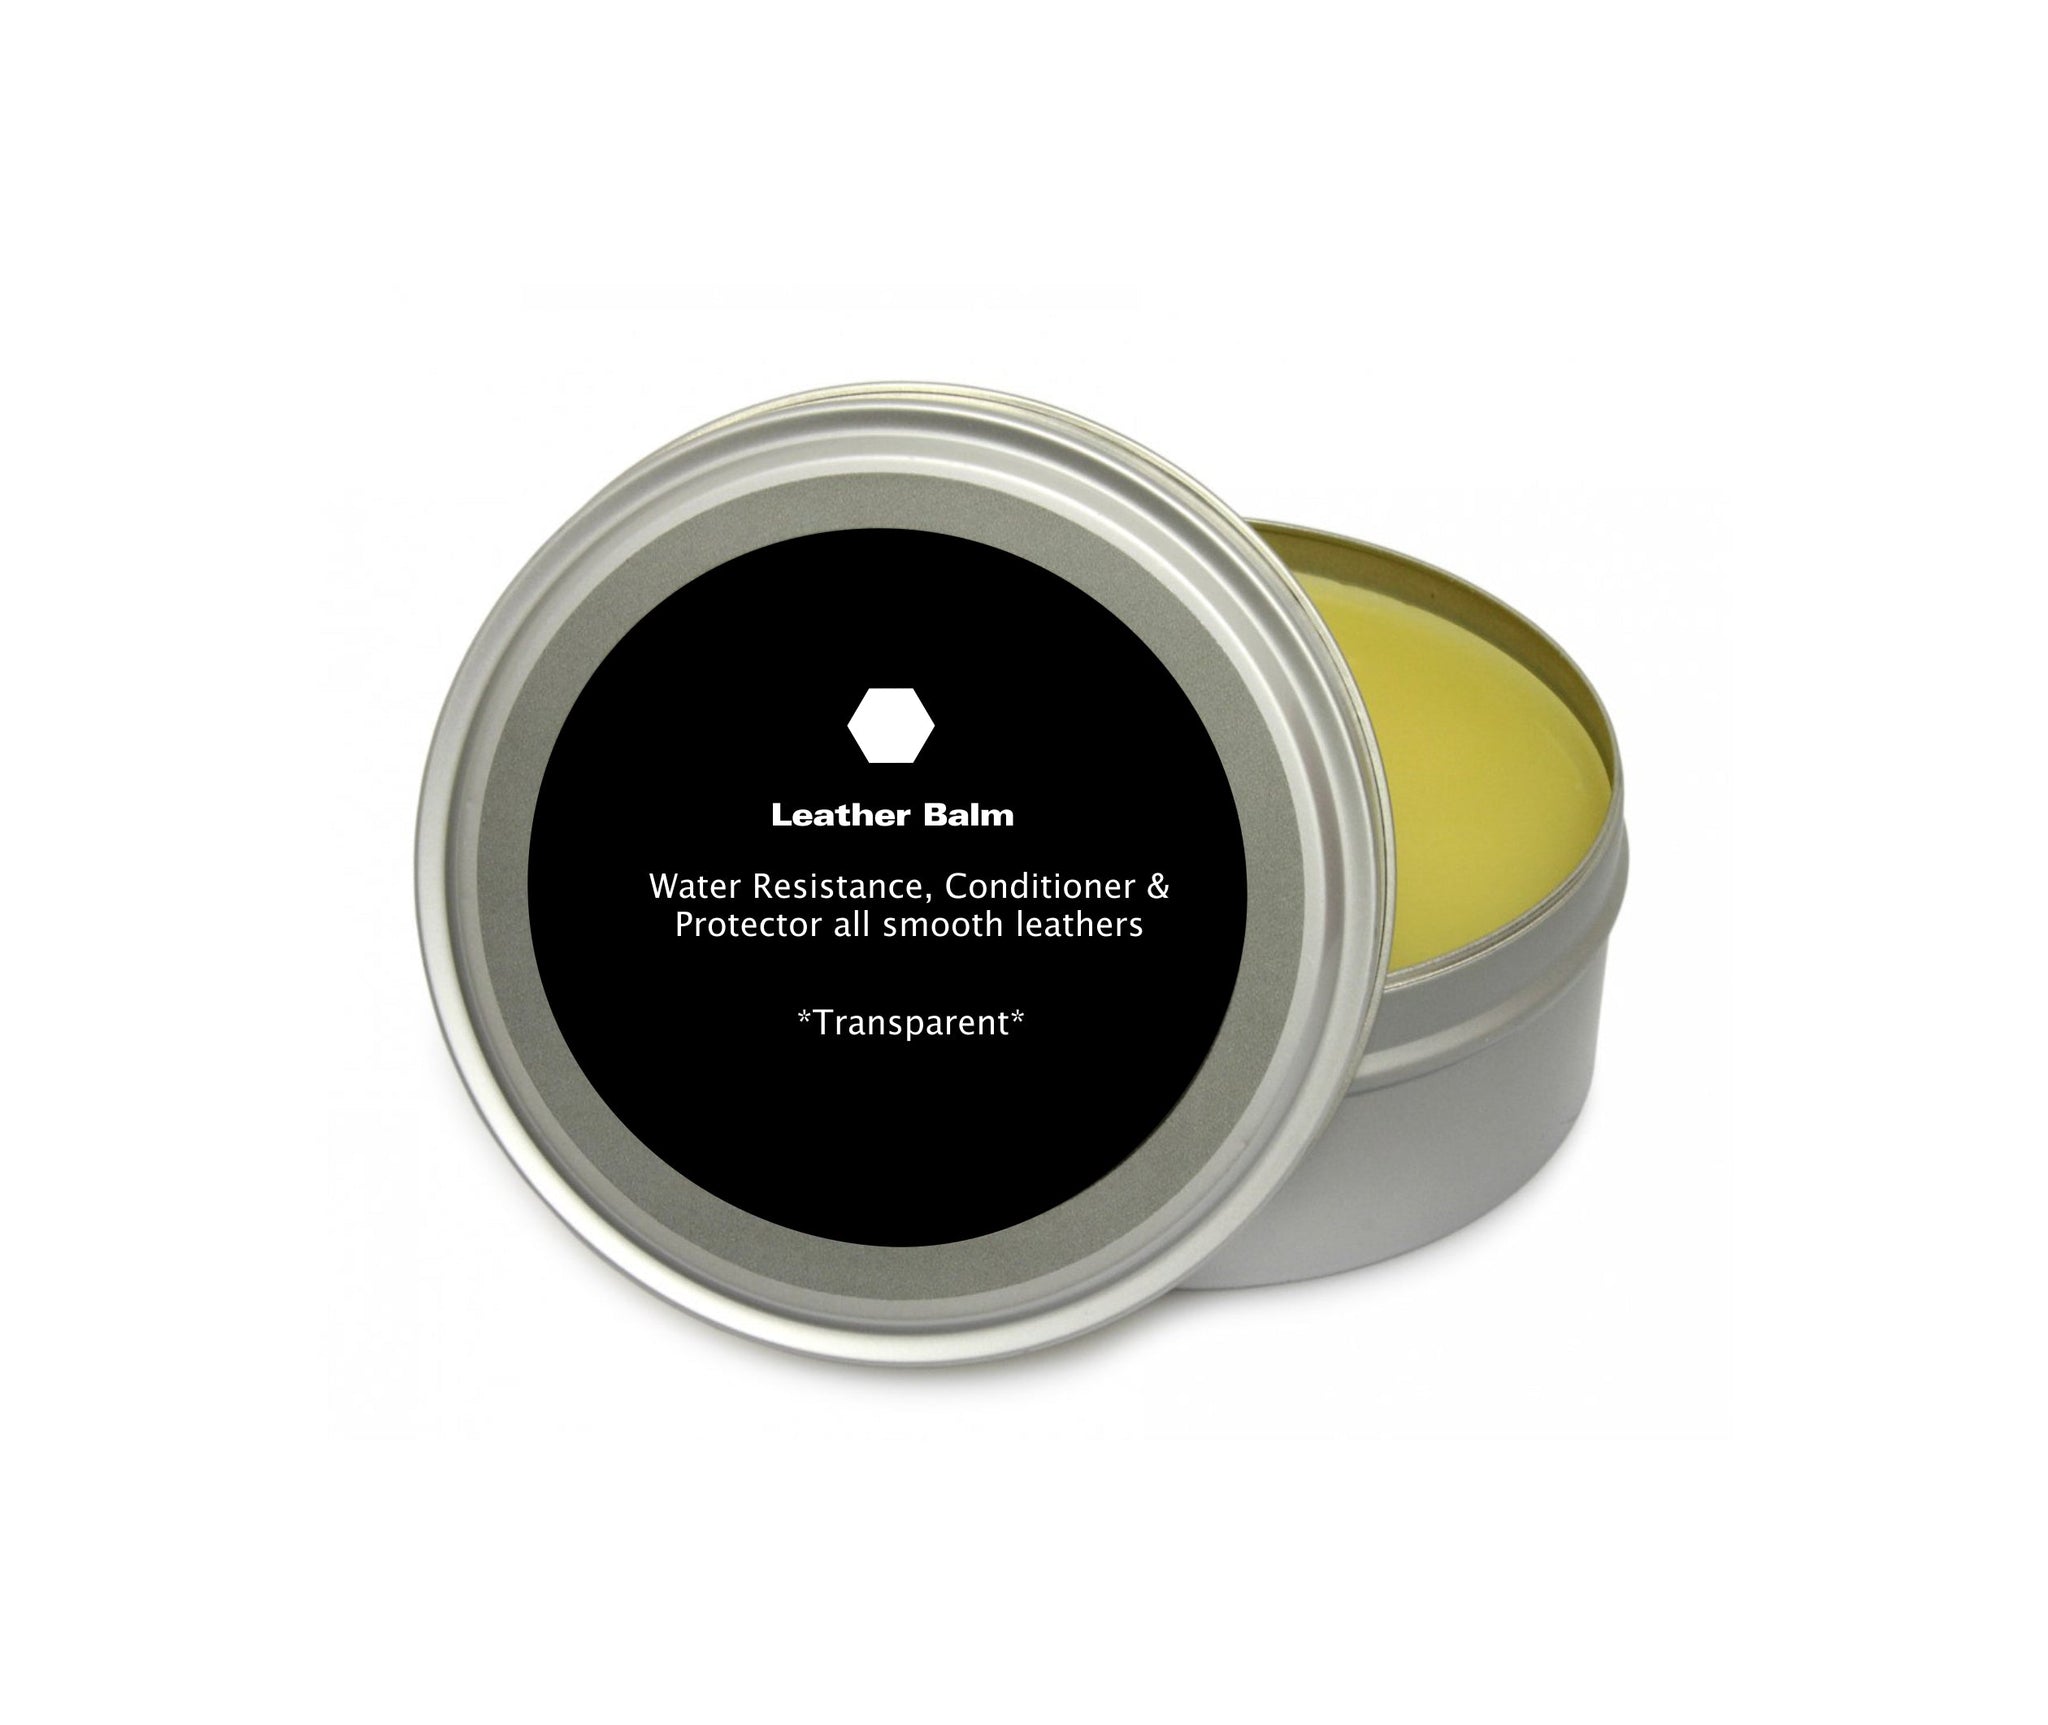 This powerful leather balm renews the leather's color and texture, smoothens cracks & protects it from water, oils, and more for up to 6 months. Shop now!